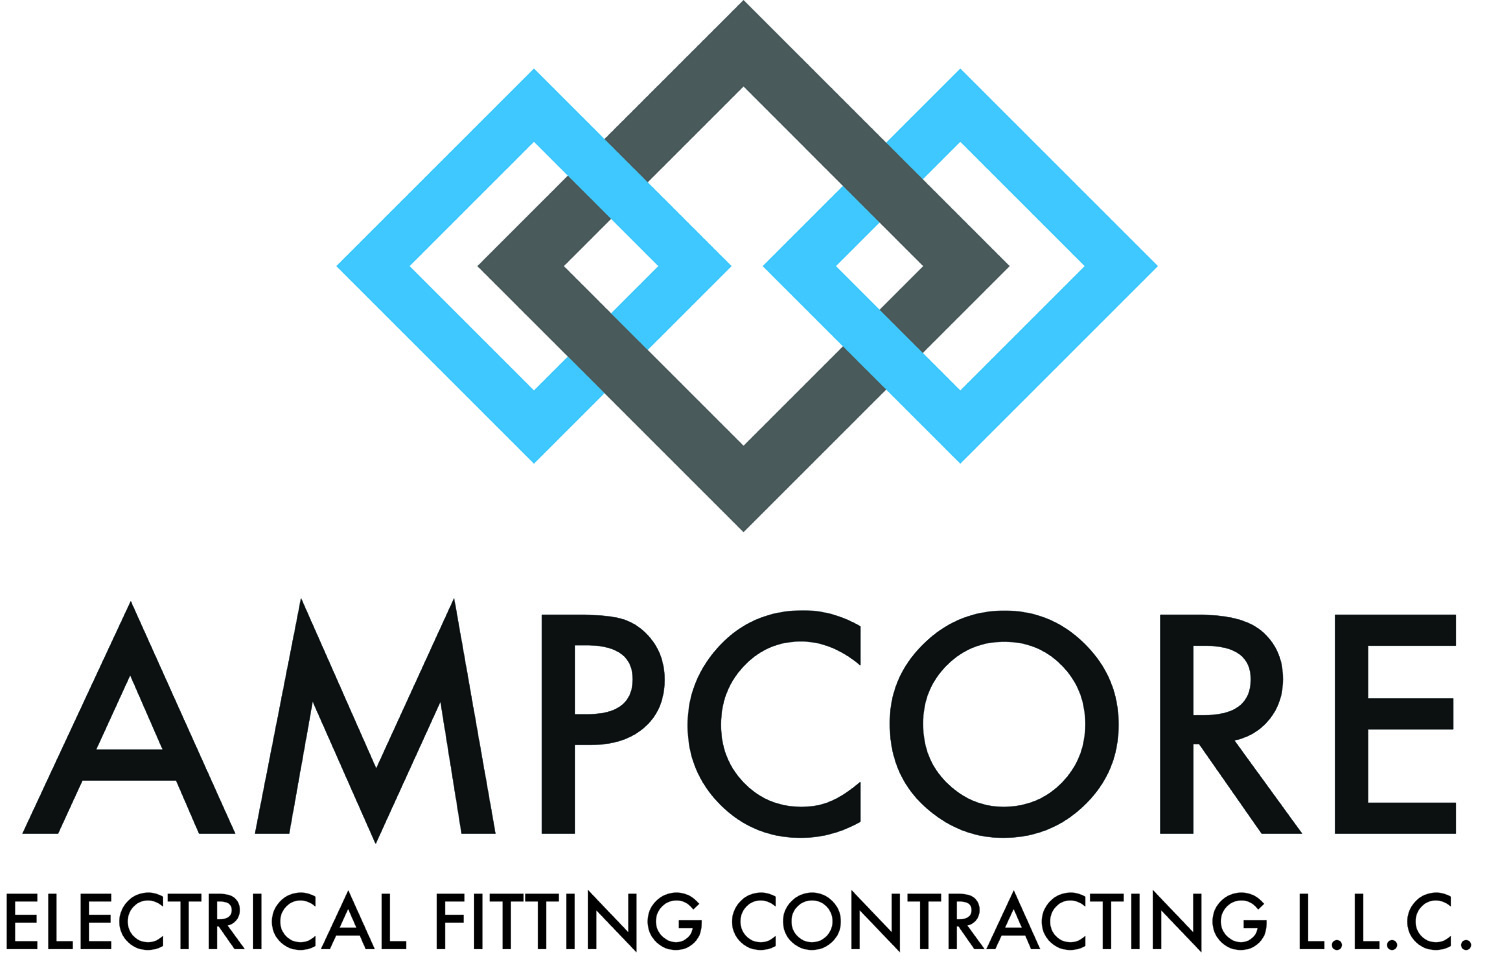 Ampcore Electrical Fitting Contracting L.L.C Logo